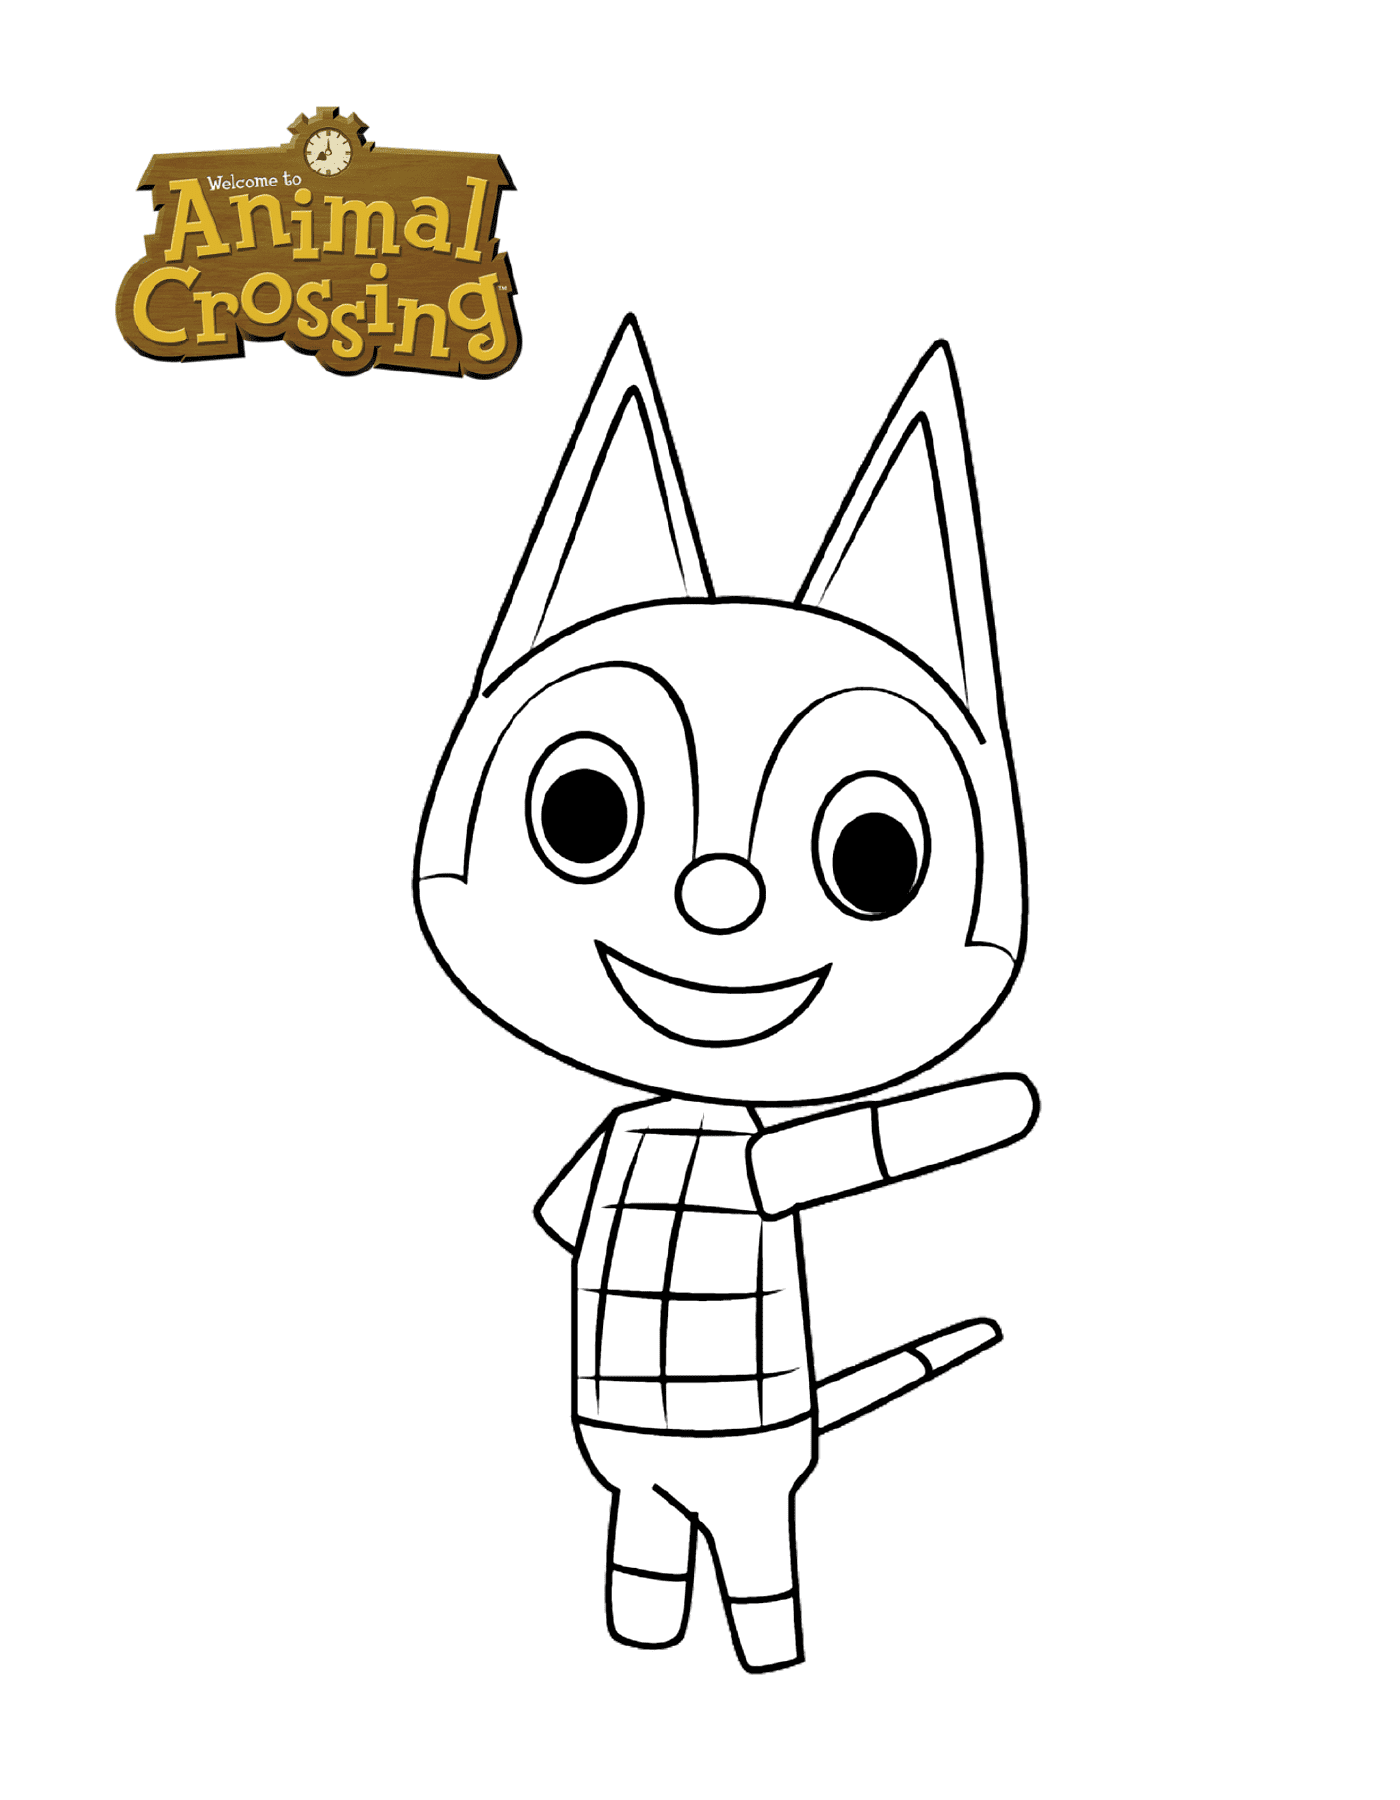   Rudy le chat d'Animal Crossing 